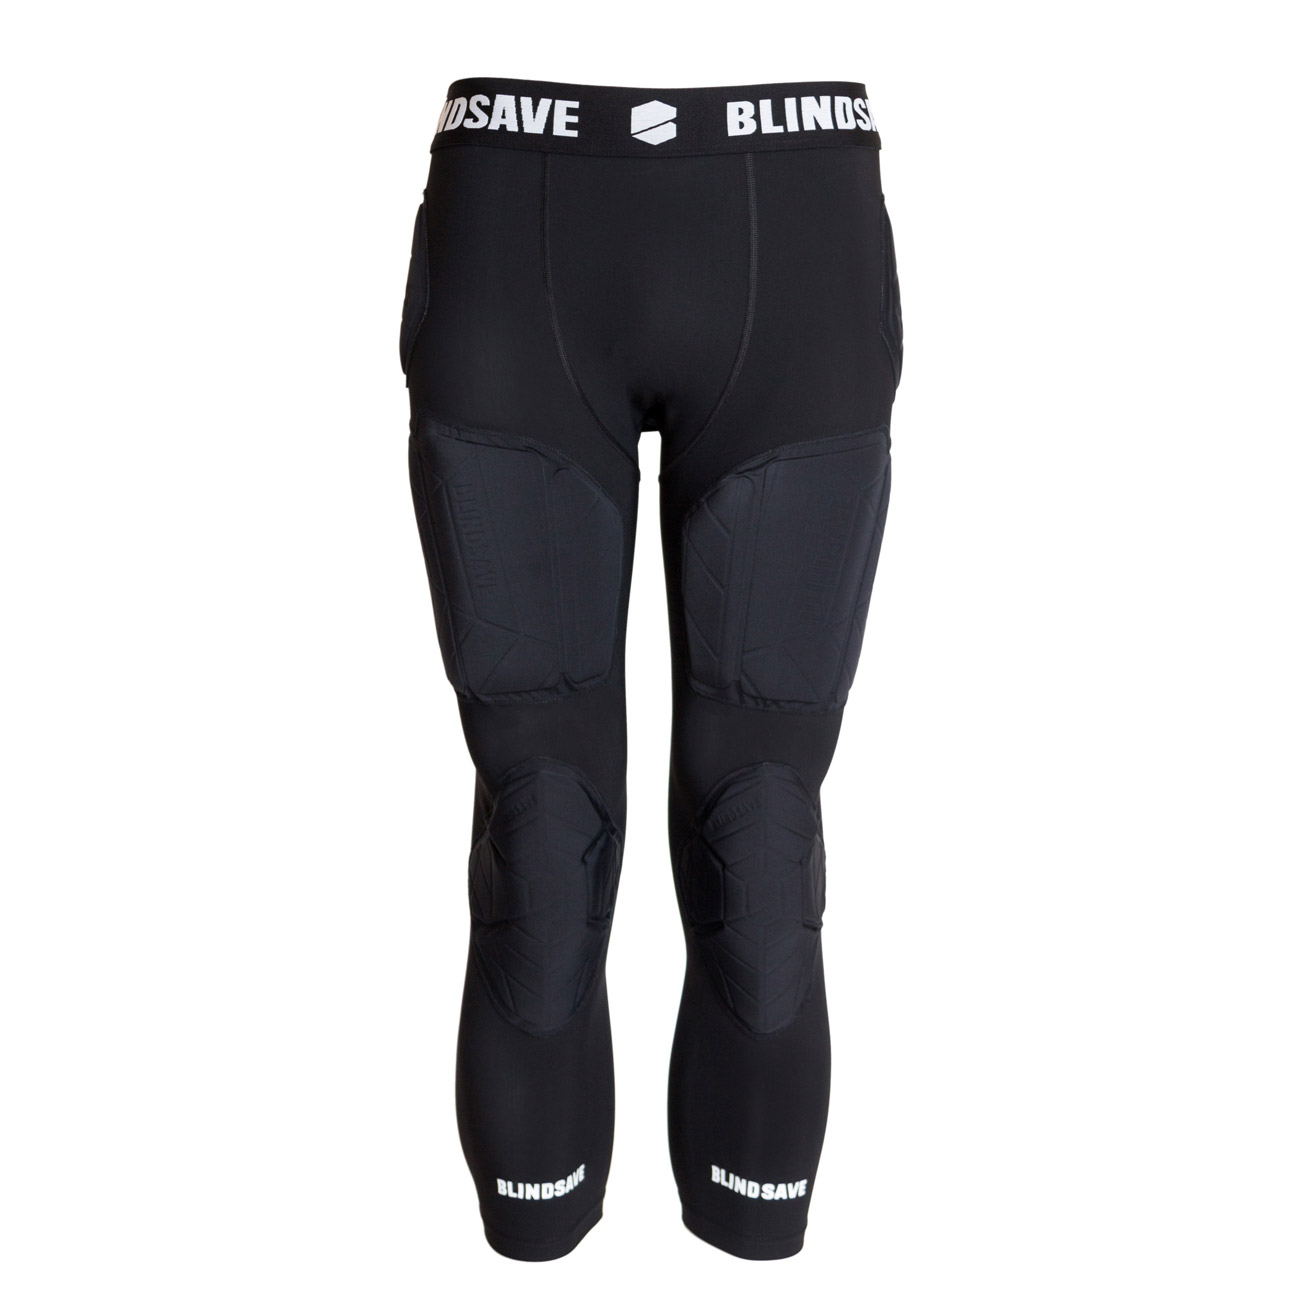 BLINDSAVE Protective 3/4 Tights with Full Protection